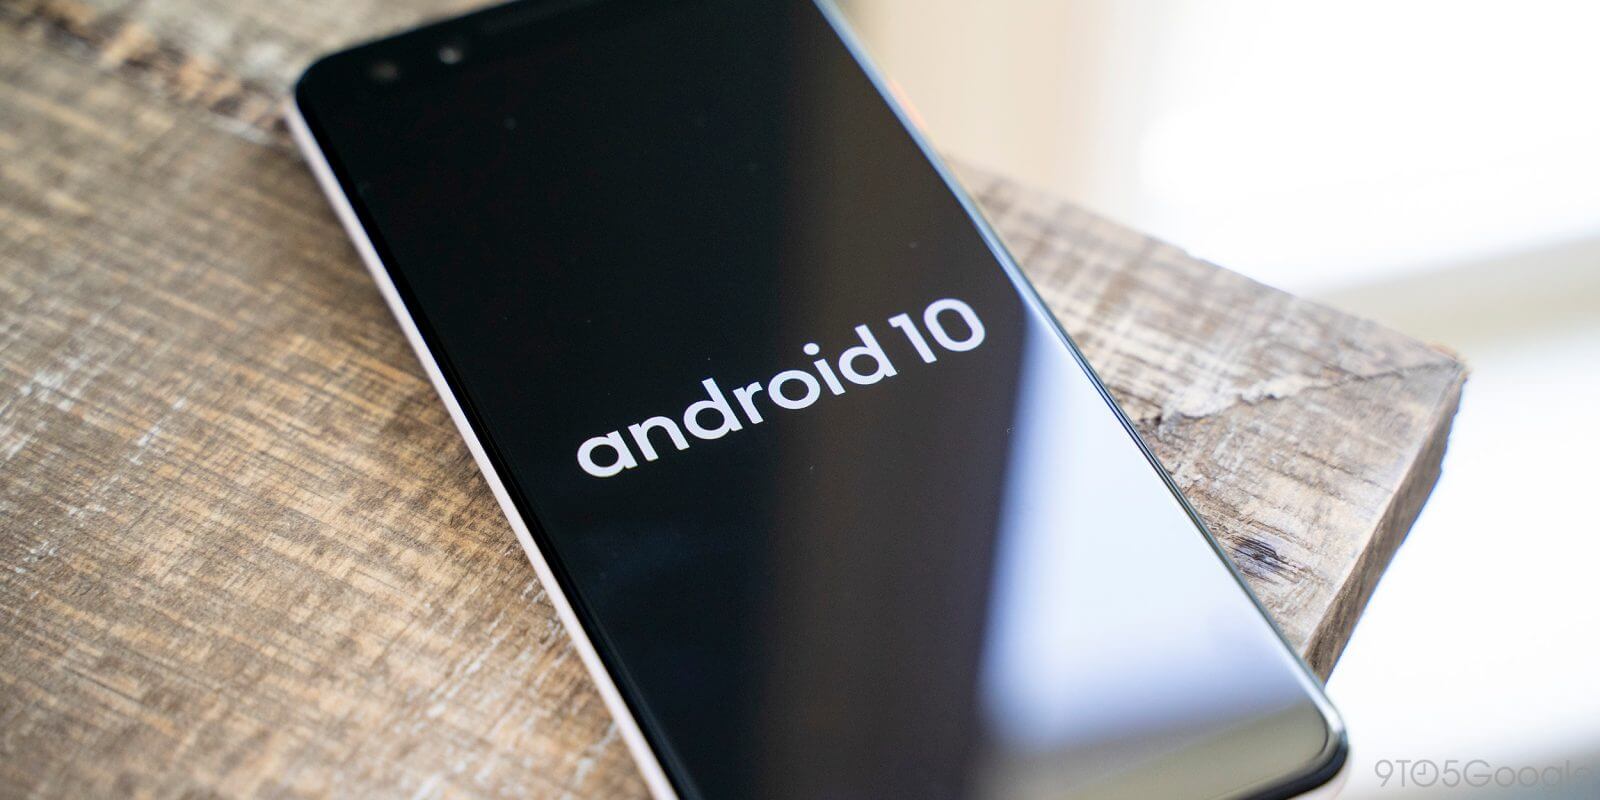 Android 10 introduced: Know all about the feature-list!